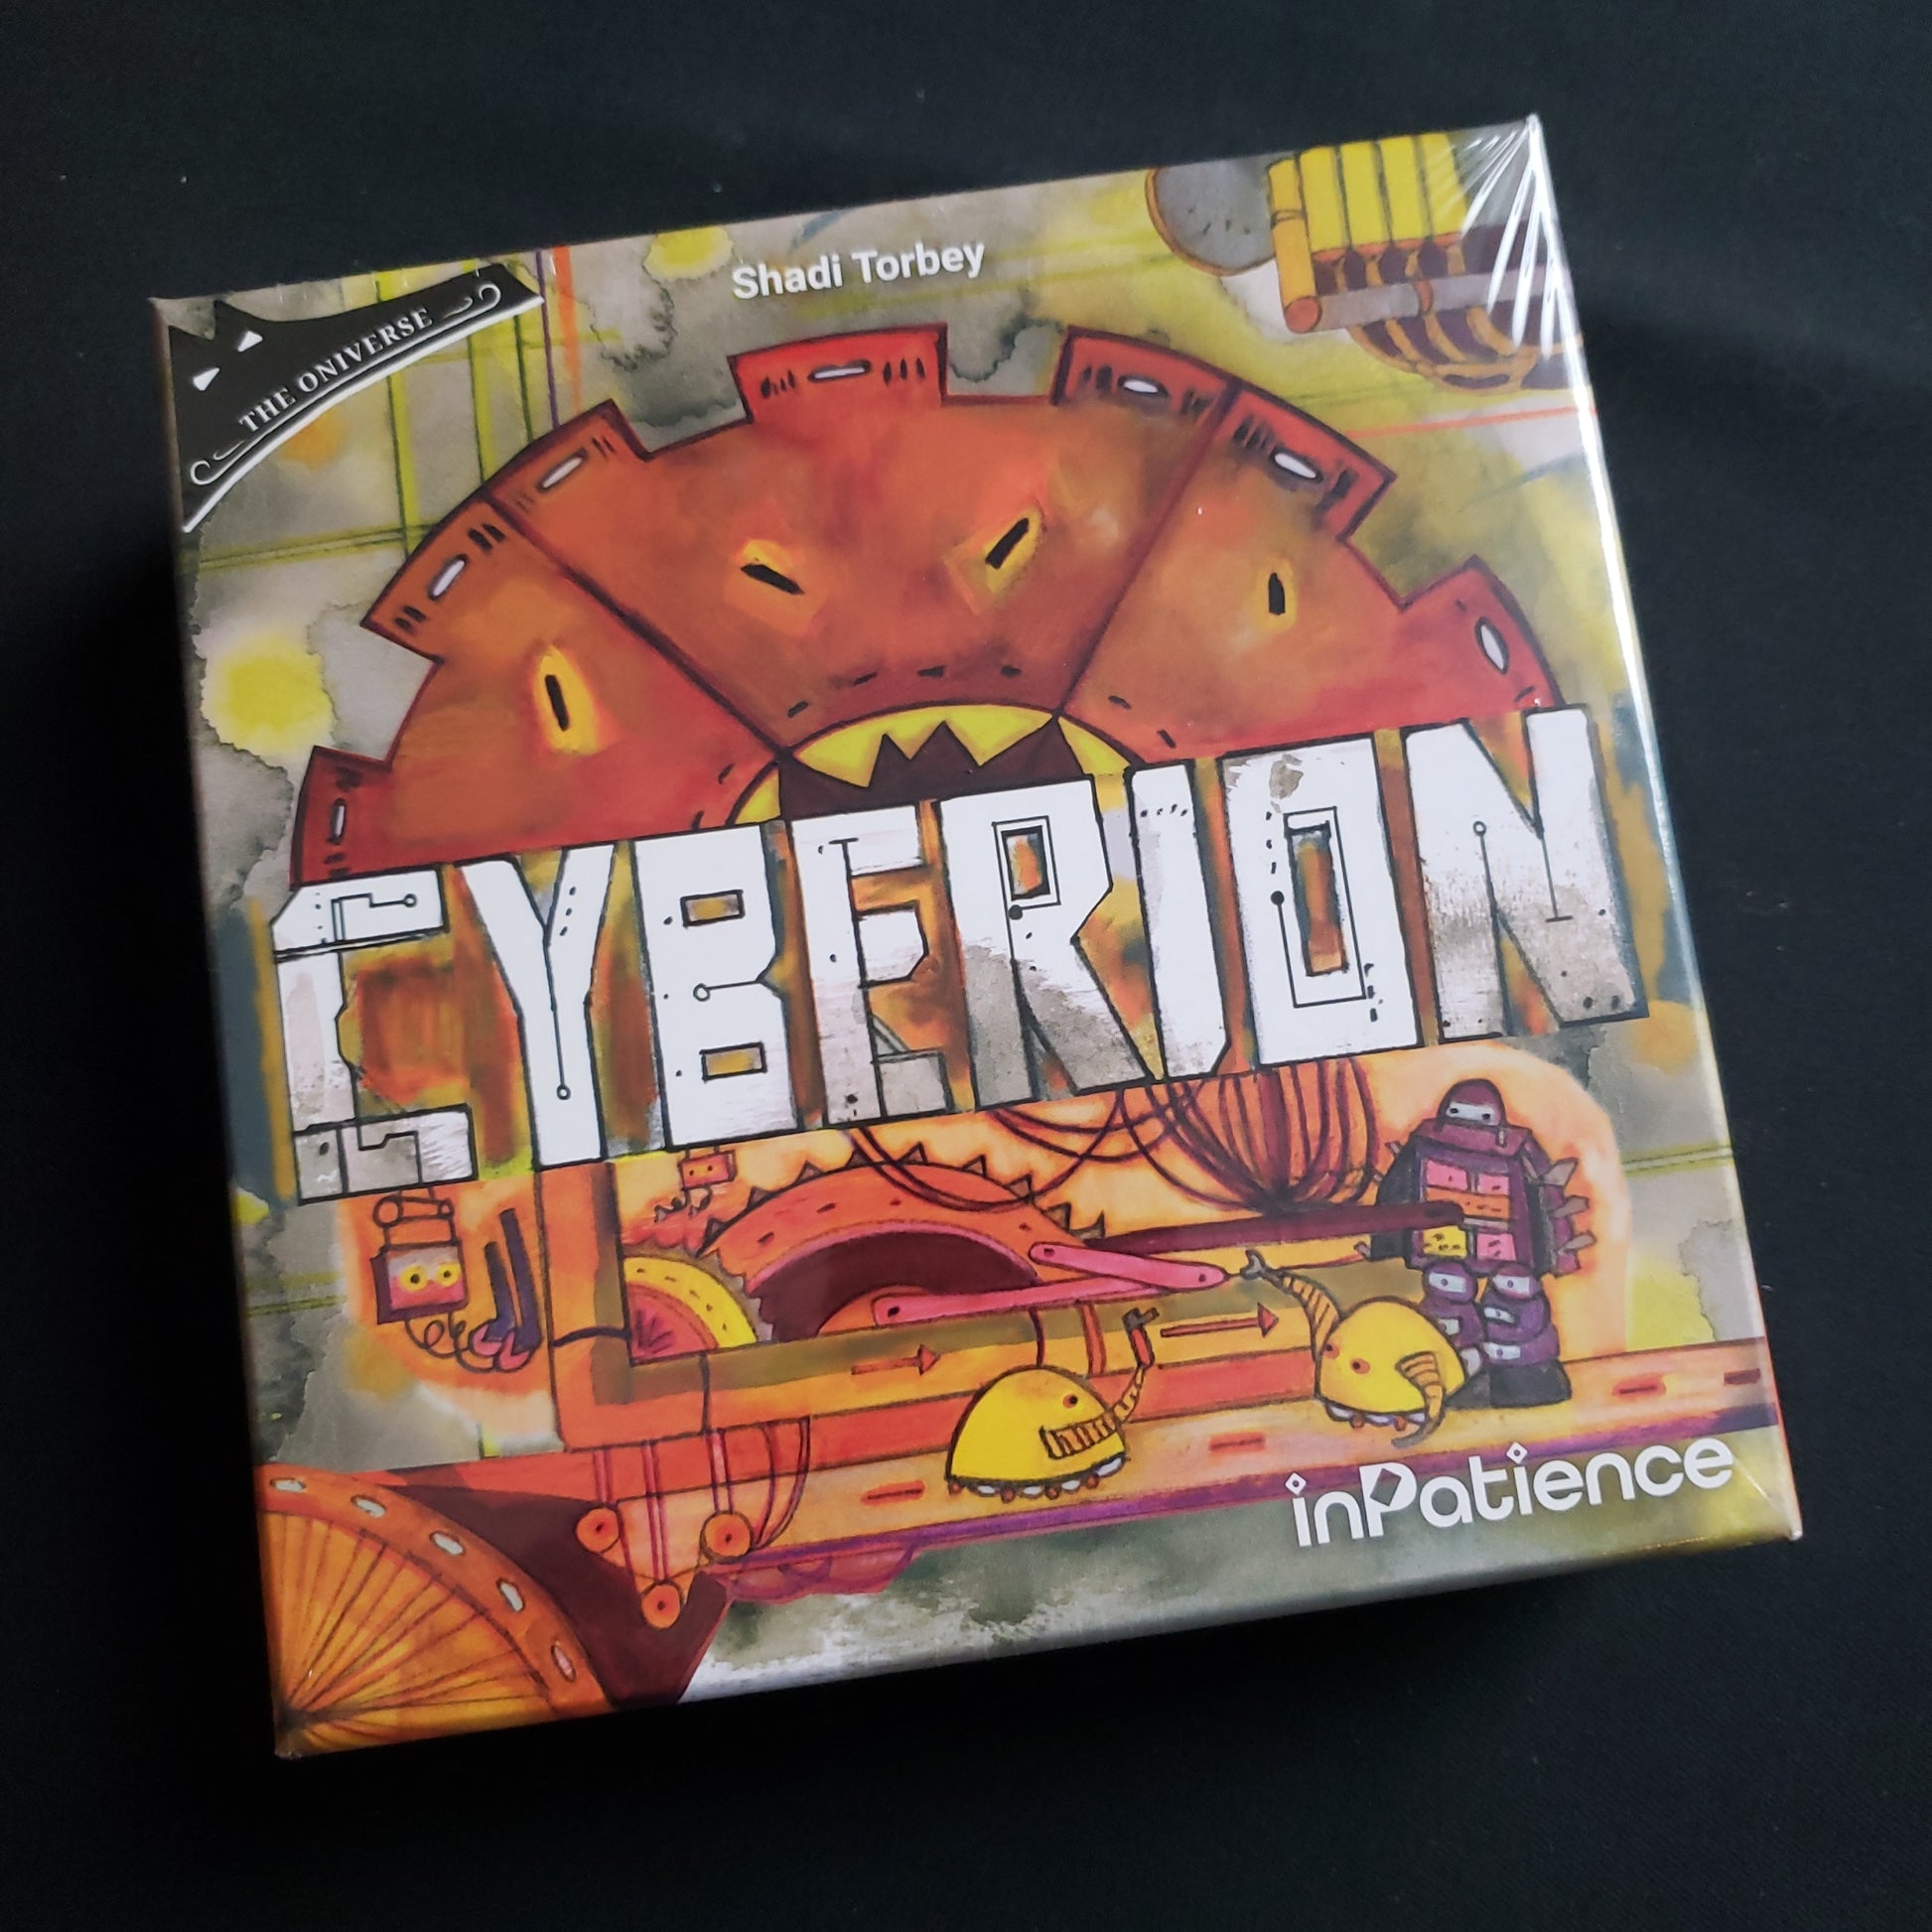 Image shows the front cover of the box of the Cyberion board game